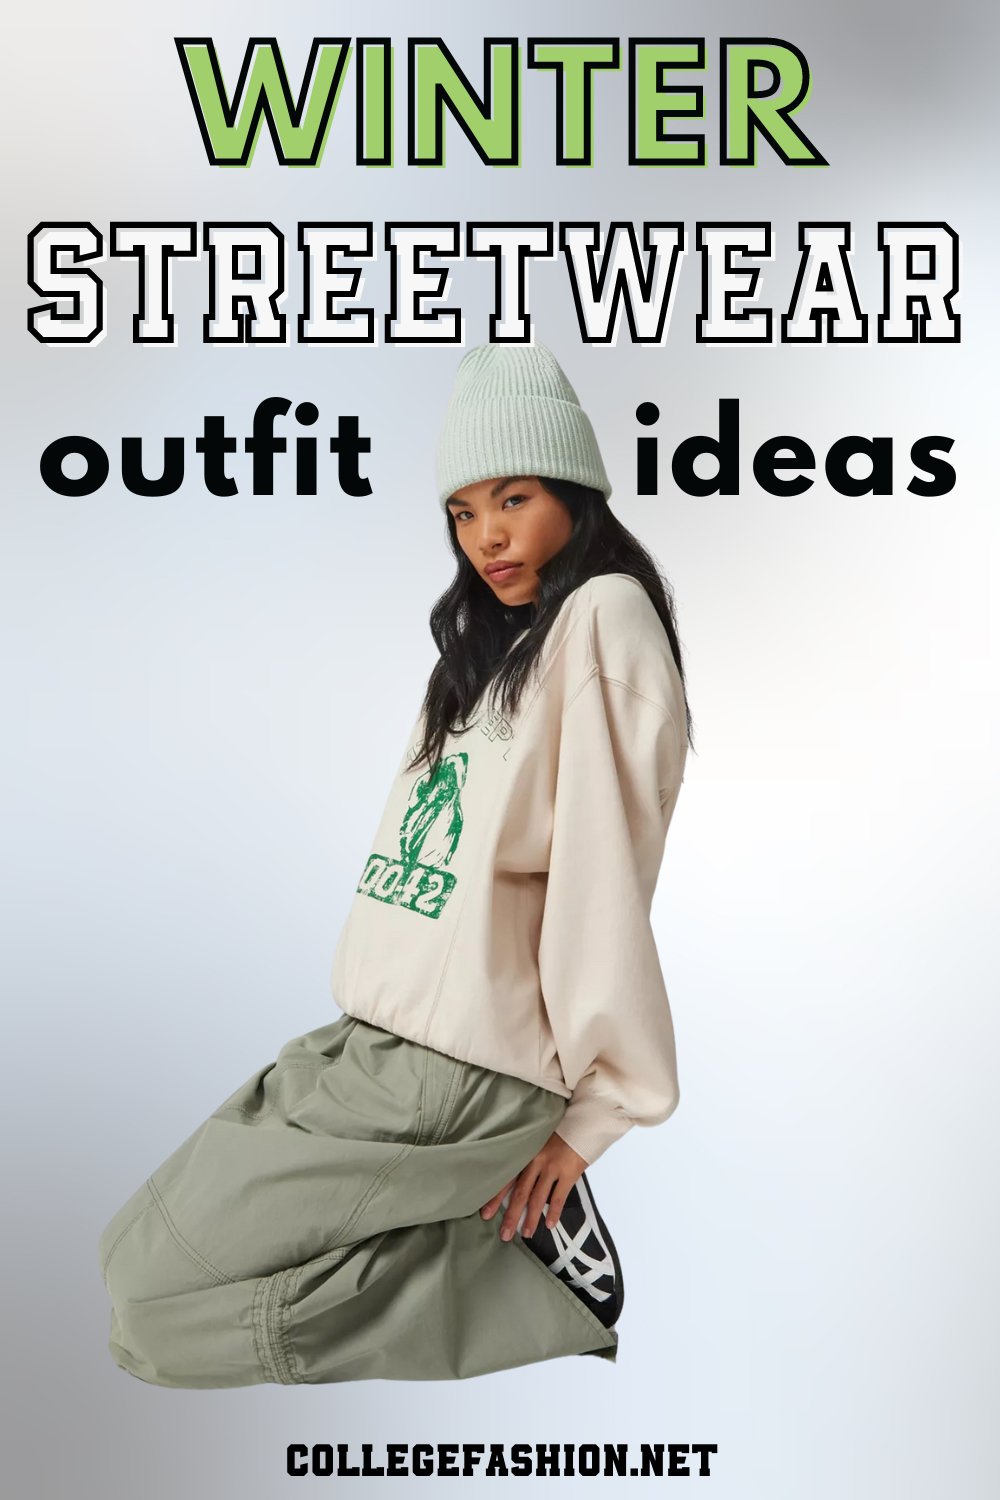 Winter Streetwear for Women: Outfits That Are Cool, Comfy, and Stylish ...